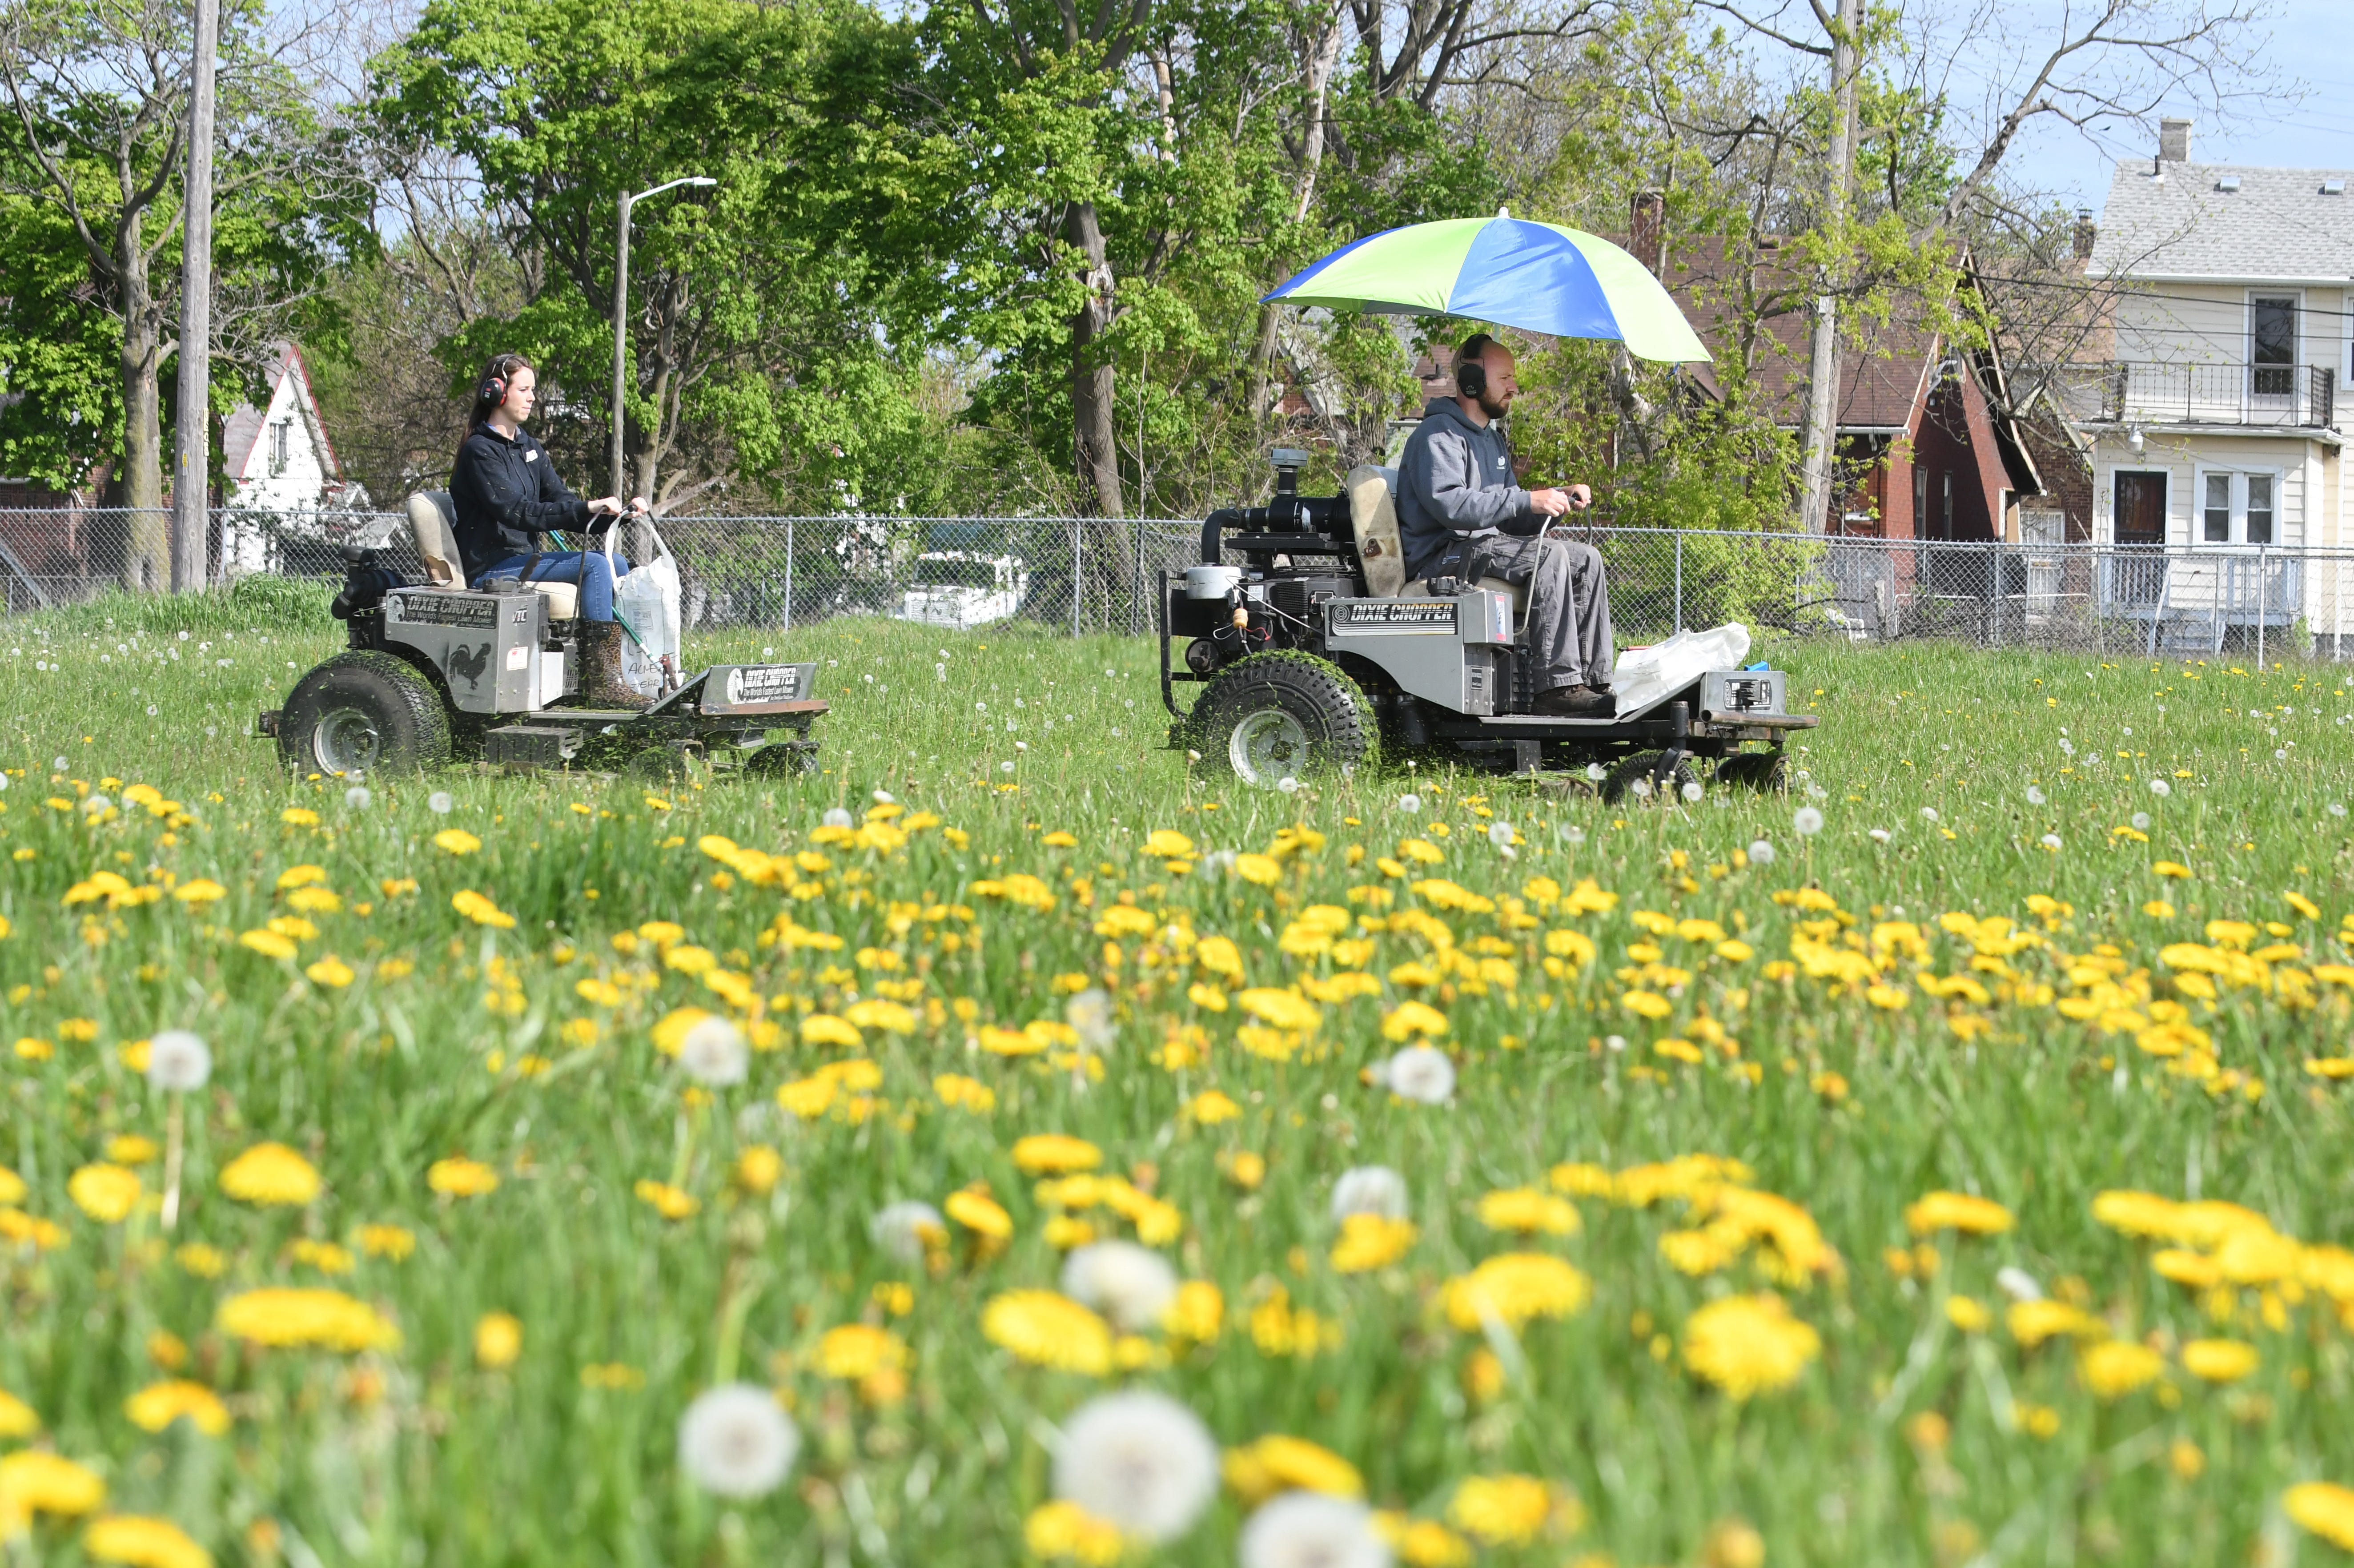 Hannah VanEckoute and her husband Gage of the Detroit Mower Gang start mowing the overgrown grass at Hammerberg Playfield in Detroit on Saturday, May 16, 2020.